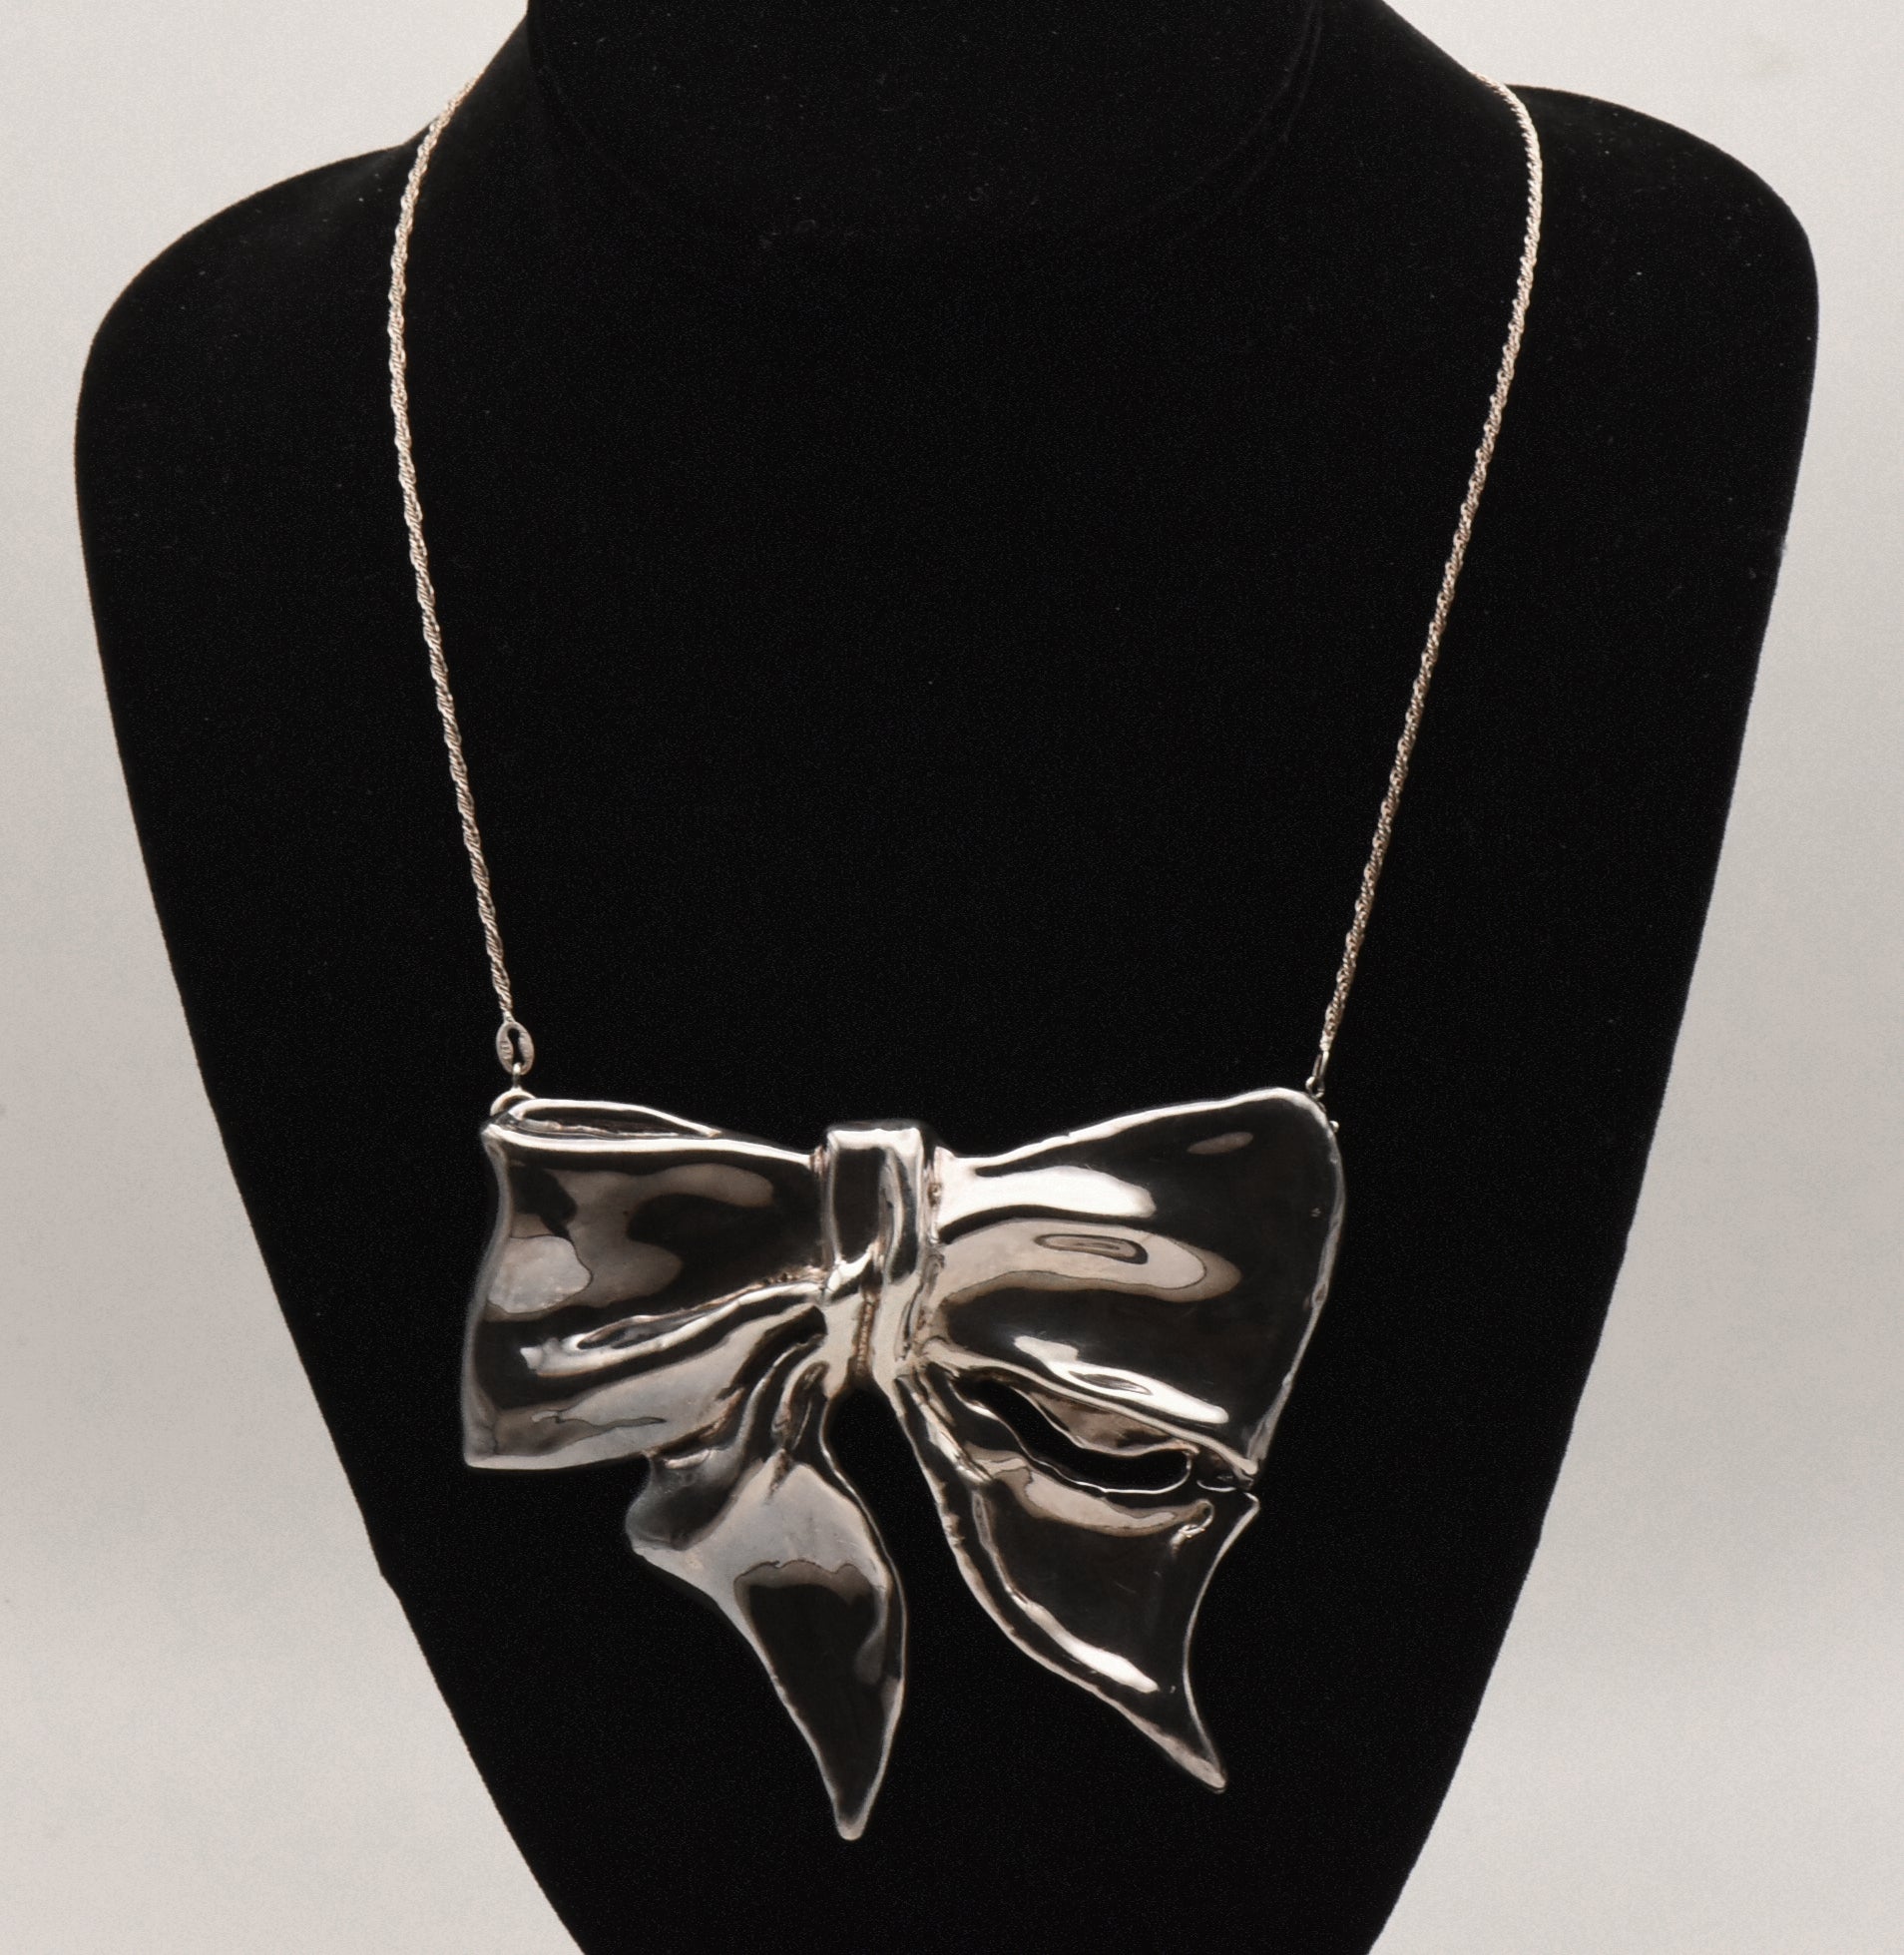 Stunning BIG! Vintage Sterling Silver Bow Pendant/Brooch on Sterling Silver Chain Necklace - 16.5"